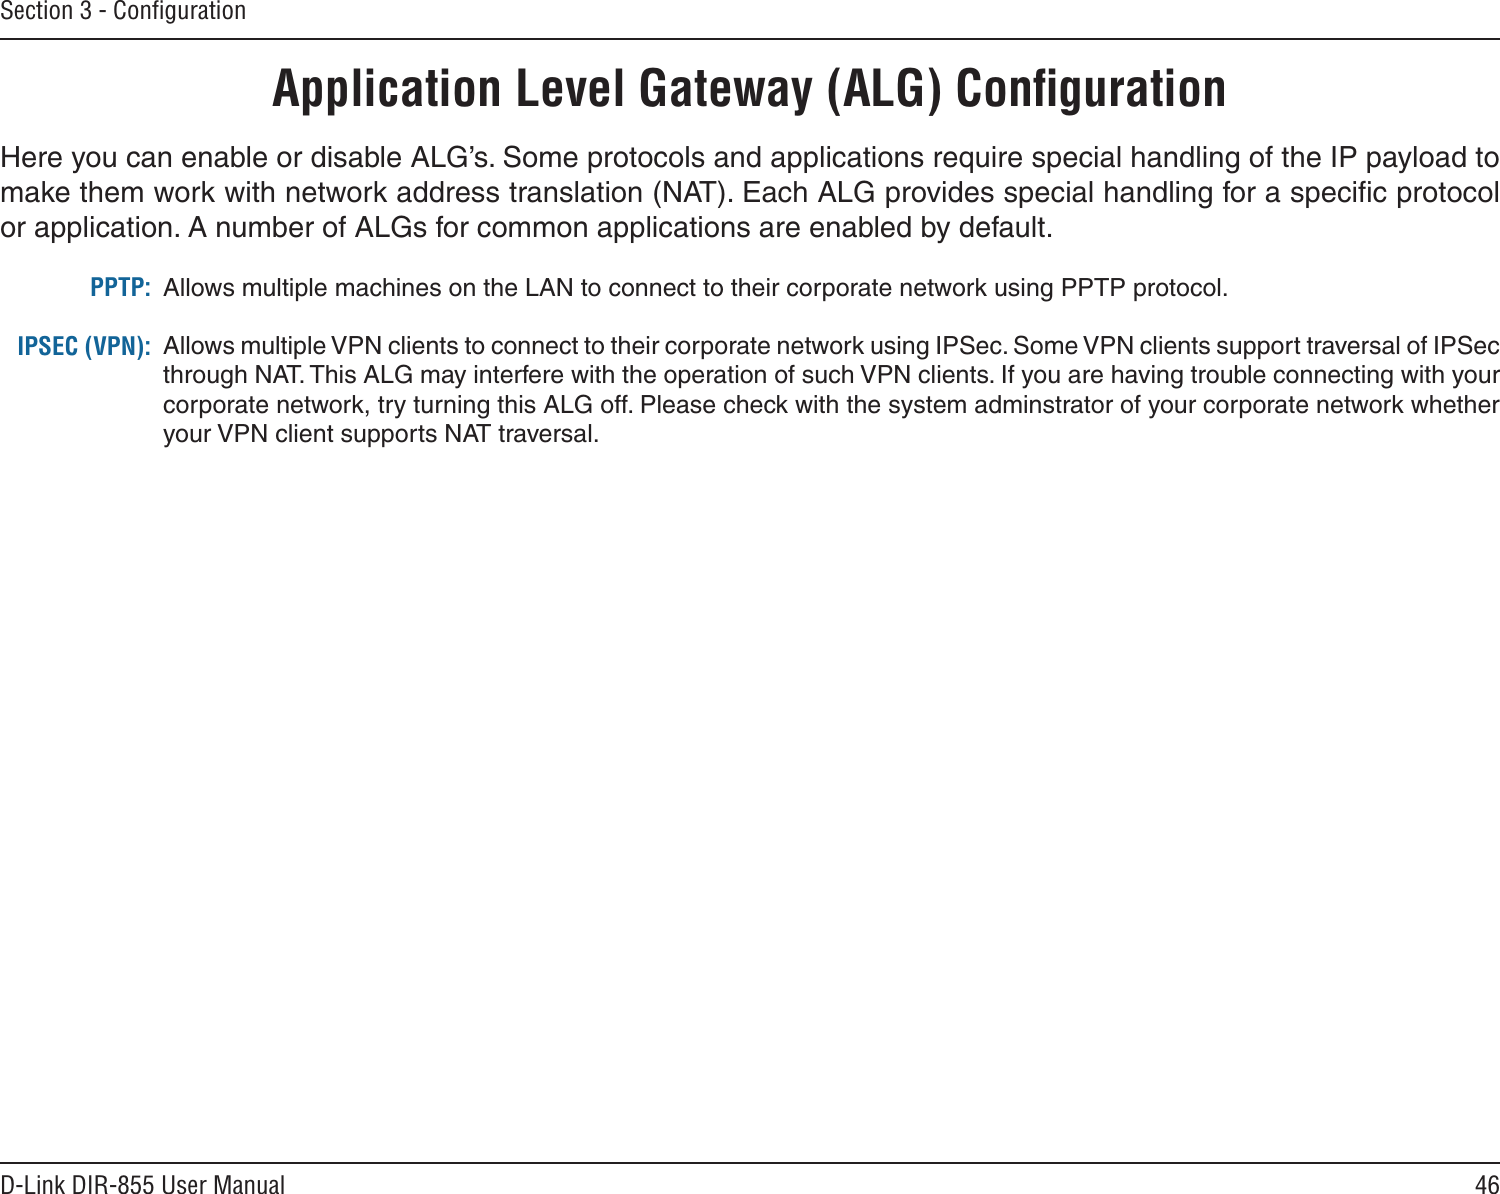 46D-Link DIR-855 User ManualSection 3 - ConﬁgurationApplication Level Gateway (ALG) ConﬁgurationHere you can enable or disable ALG’s. Some protocols and applications require special handling of the IP payload to make them work with network address translation (NAT). Each ALG provides special handling for a speciﬁc protocol or application. A number of ALGs for common applications are enabled by default.Allows multiple machines on the LAN to connect to their corporate network using PPTP protocol. Allows multiple VPN clients to connect to their corporate network using IPSec. Some VPN clients support traversal of IPSec through NAT. This ALG may interfere with the operation of such VPN clients. If you are having trouble connecting with your corporate network, try turning this ALG off. Please check with the system adminstrator of your corporate network whether your VPN client supports NAT traversal.PPTP:IPSEC (VPN):